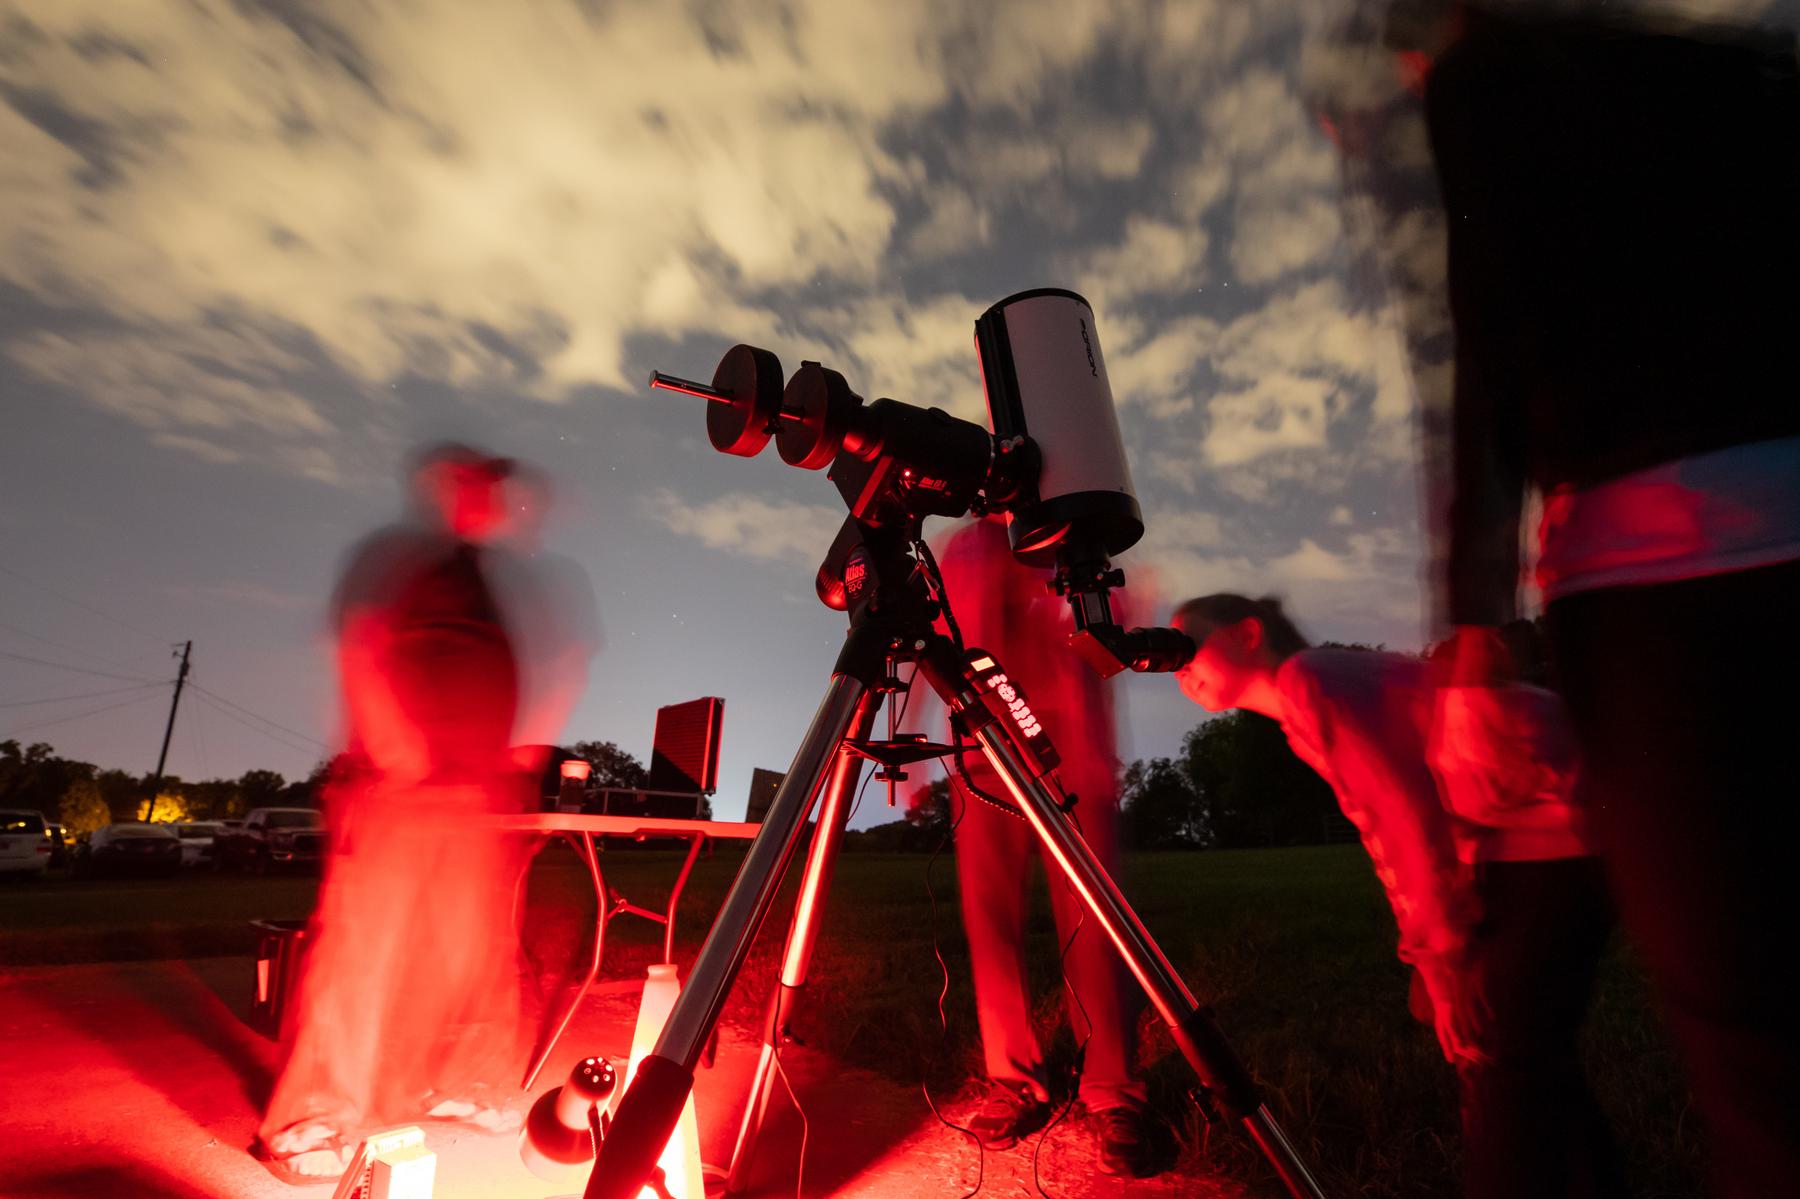 Austin Peay State University’s Department of Physics, Engineering and Astronomy gave children and adult astronomy enthusiasts a chance to observe Saturn, Jupiter, star clusters and nebulae at the university’s observatory on Saturday, Sept. 17. 